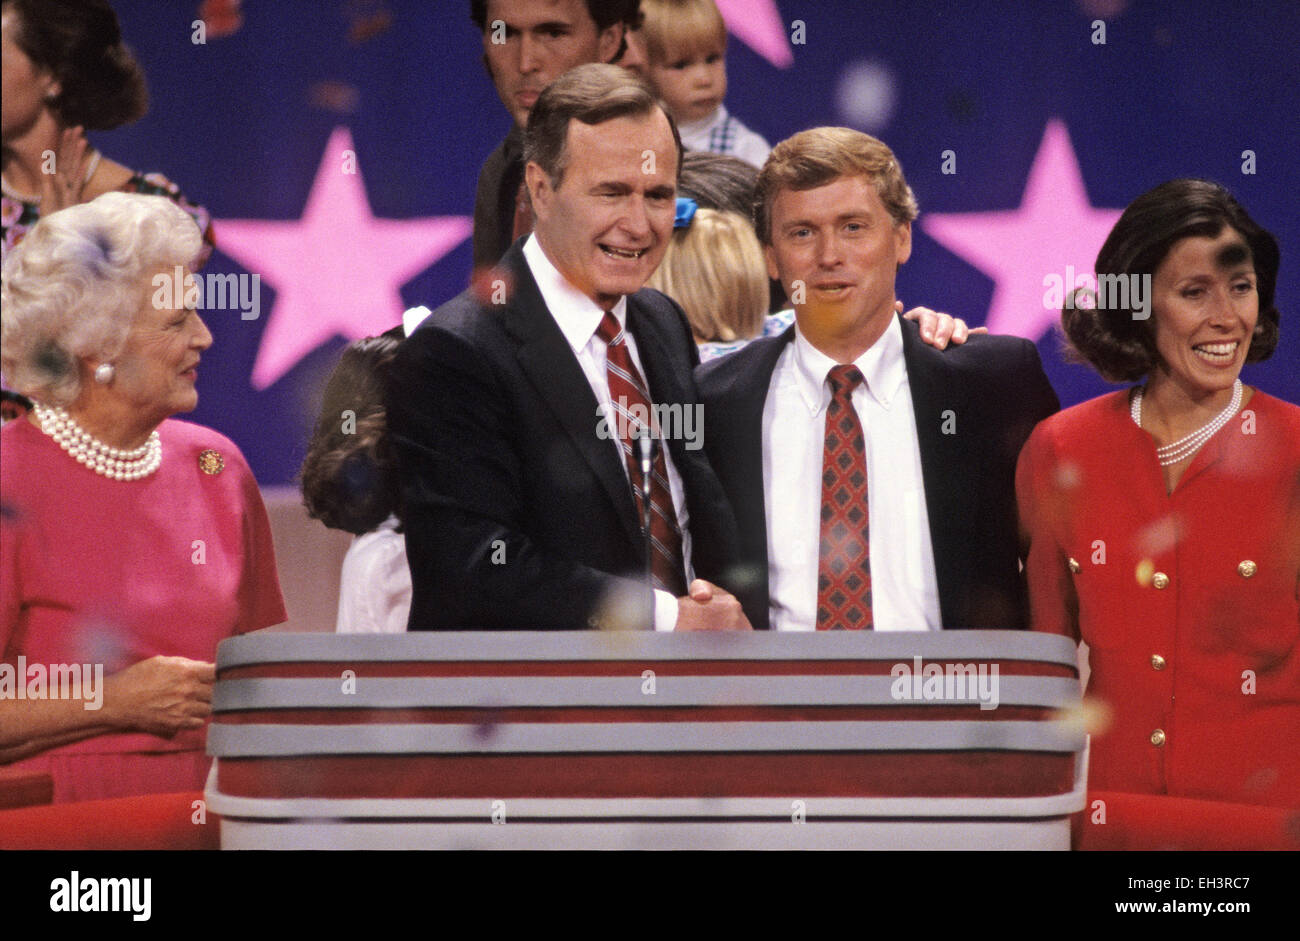 United States Vice President George H.W. Bush, left center, and U.S. Senator Dan Quayle (Republican of Indiana), right center, on the podium after delivering their speeches accepting their party's nomination for President and Vice President of the United States respectively at the 1988 Republican Convention at the Super Dome in New Orleans, Louisiana on August 18, 1988. With them are their wives, Barbara Bush, left, and Marilyn Quayle, right. Credit: Arnie Sachs/CNP - NO WIRE SERVICE - Stock Photo